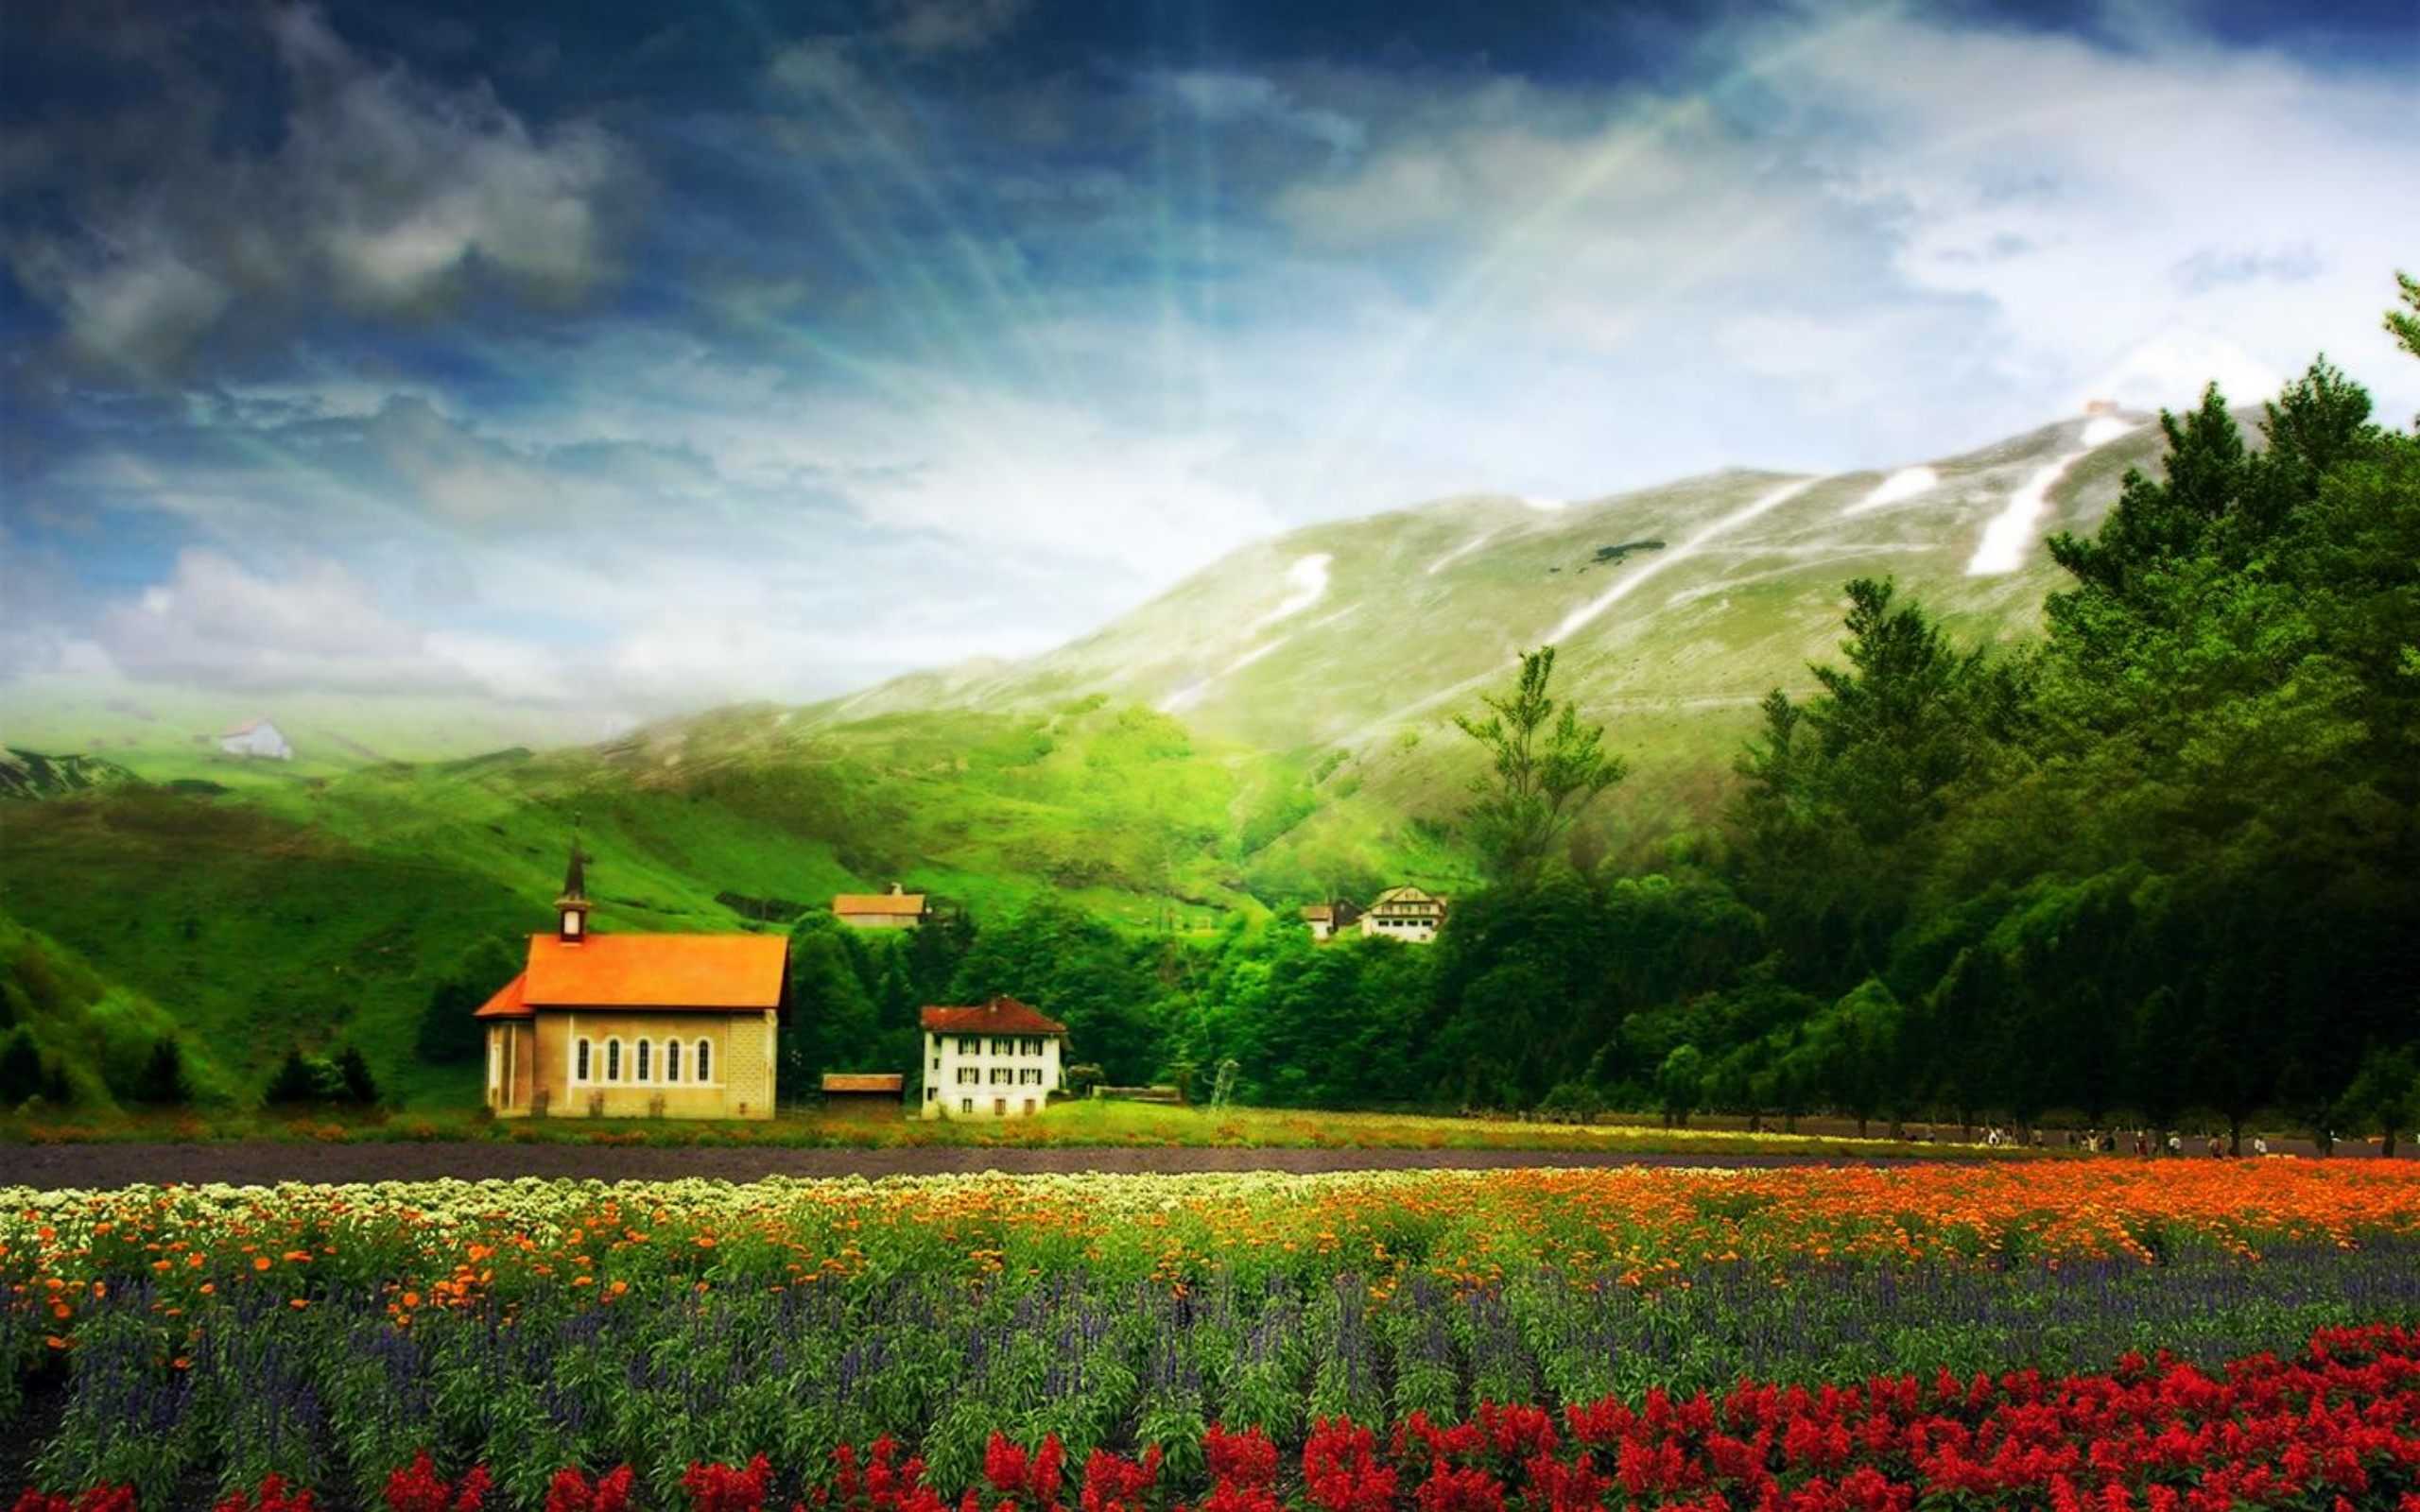 25 Outstanding Wallpaper For Desktop Scenery You Can Get It Free